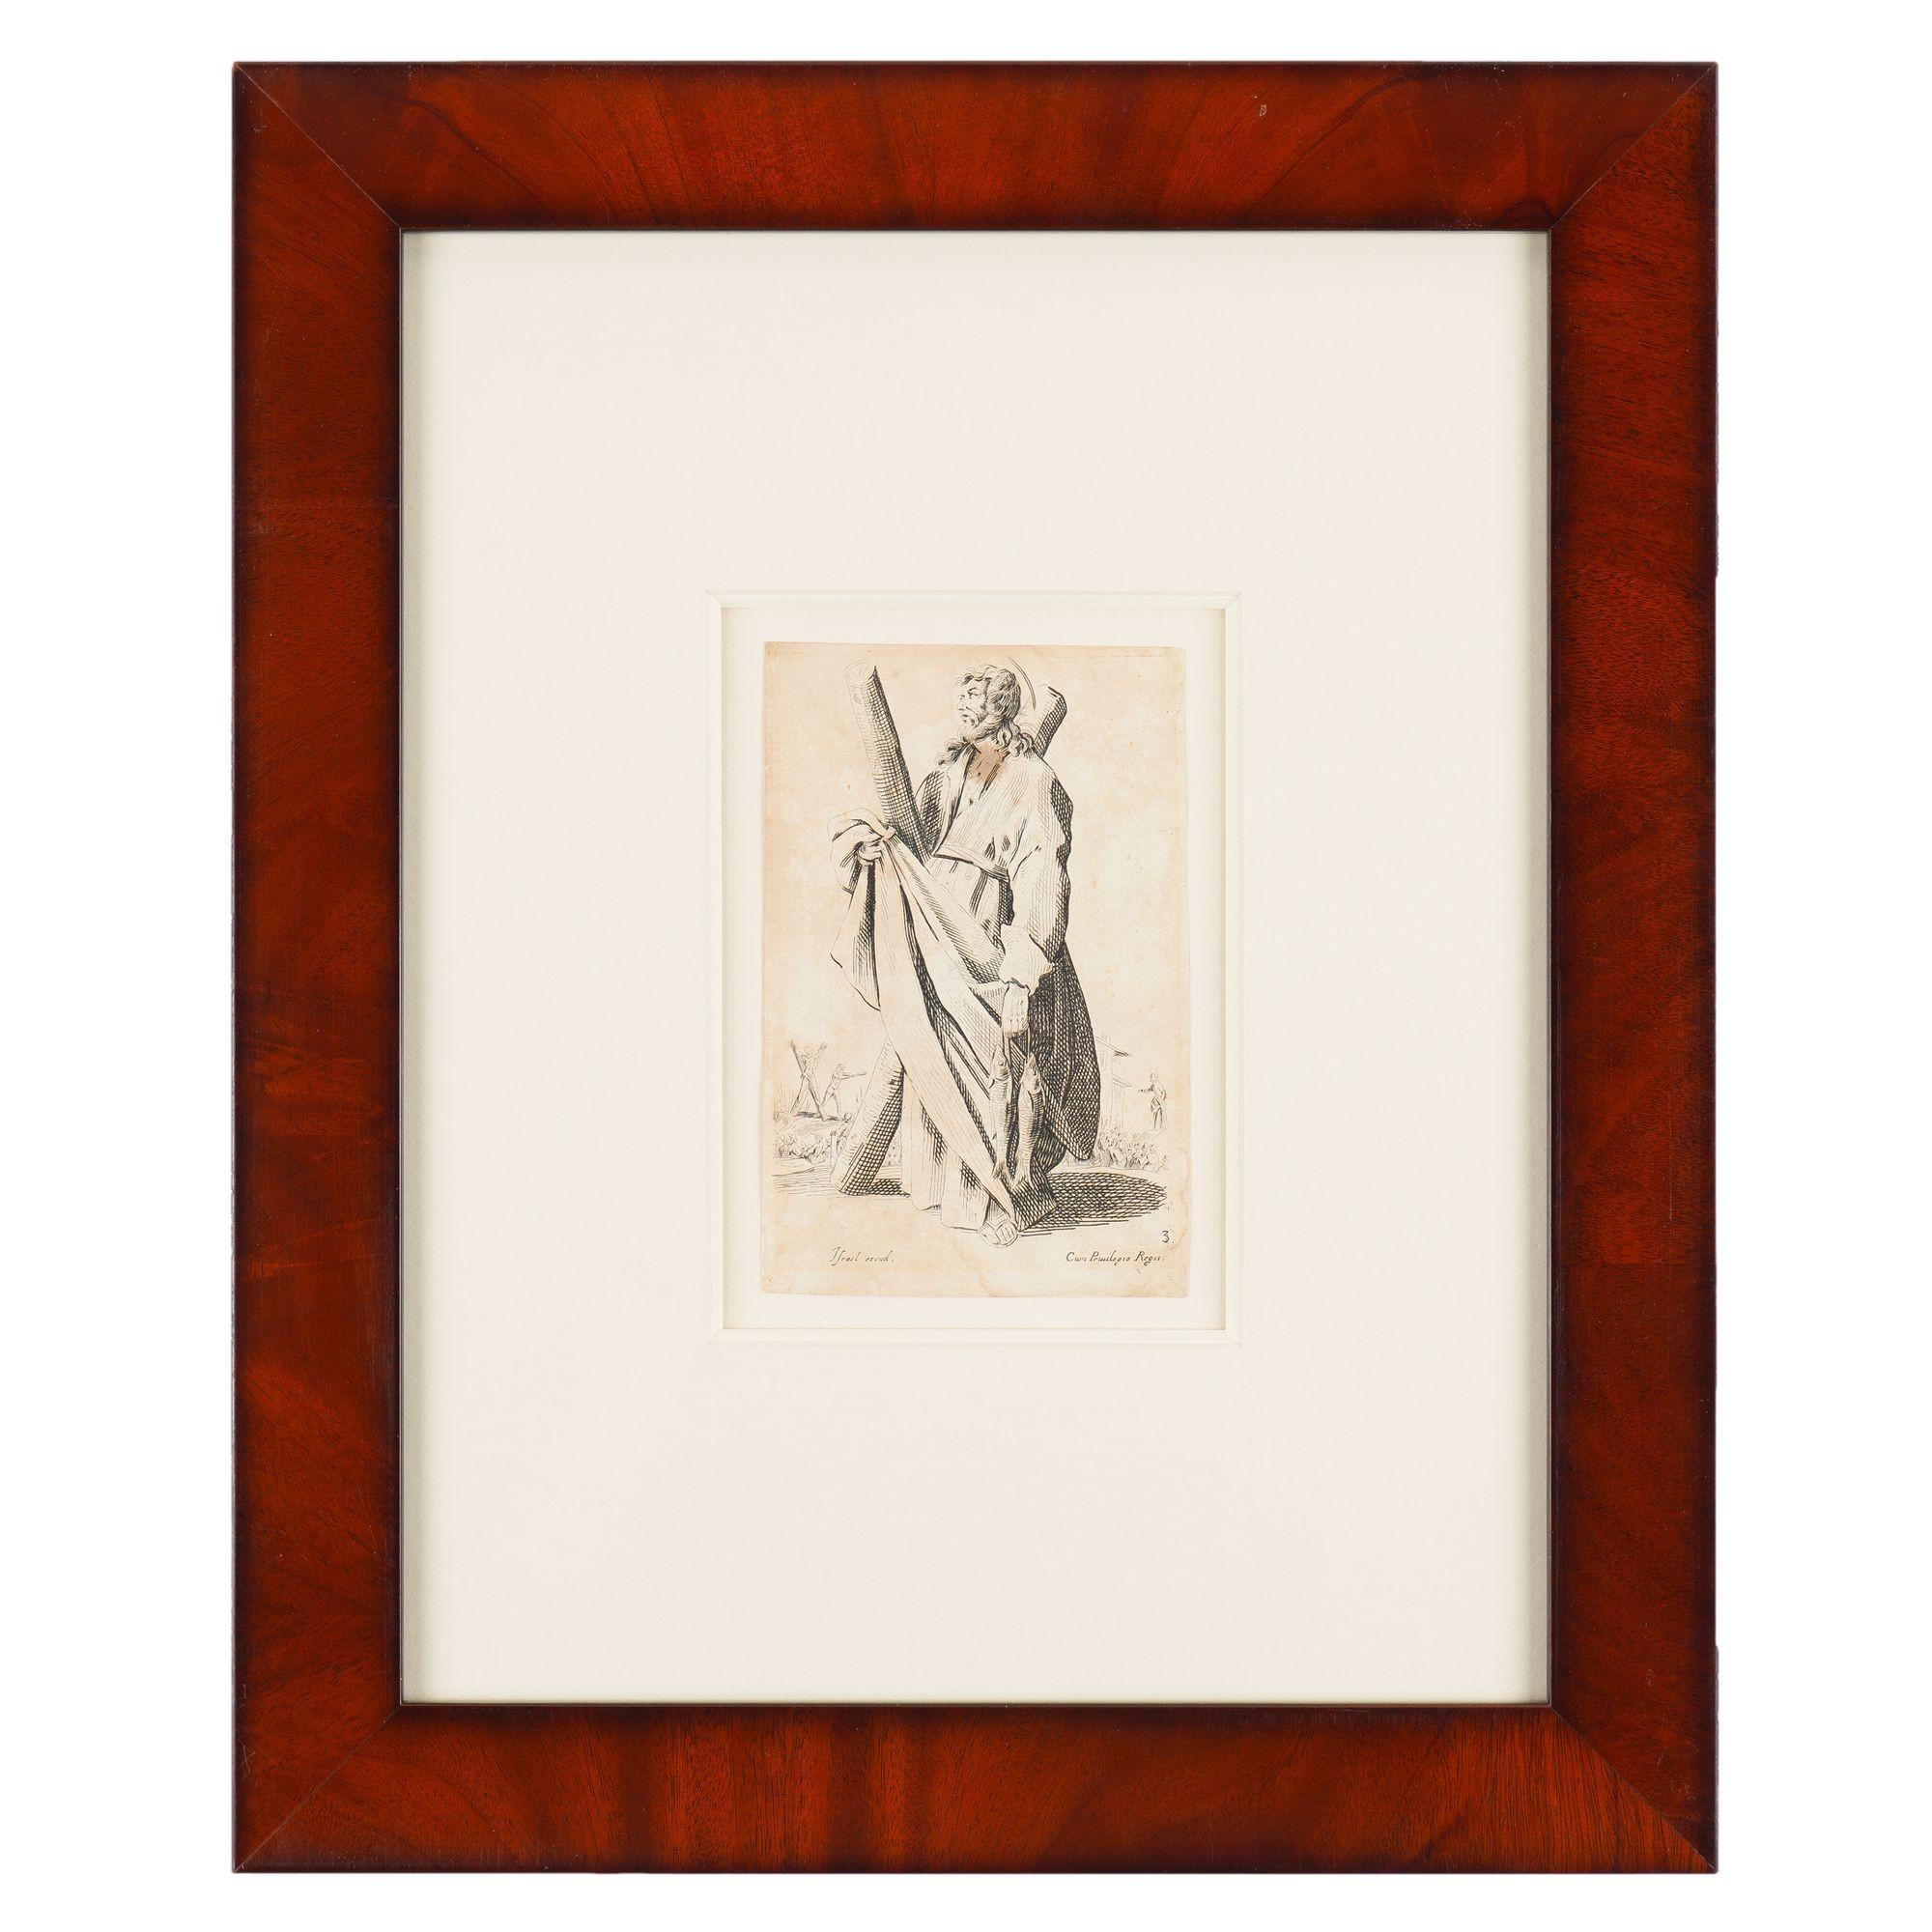 Set of six biblical prints from master French engraver, Jacques Callot, from his works of the Saints and Apostles. The works are float mounted with a deep beveled archival mat and framed in mahogany cross banded moldings under UV filtering